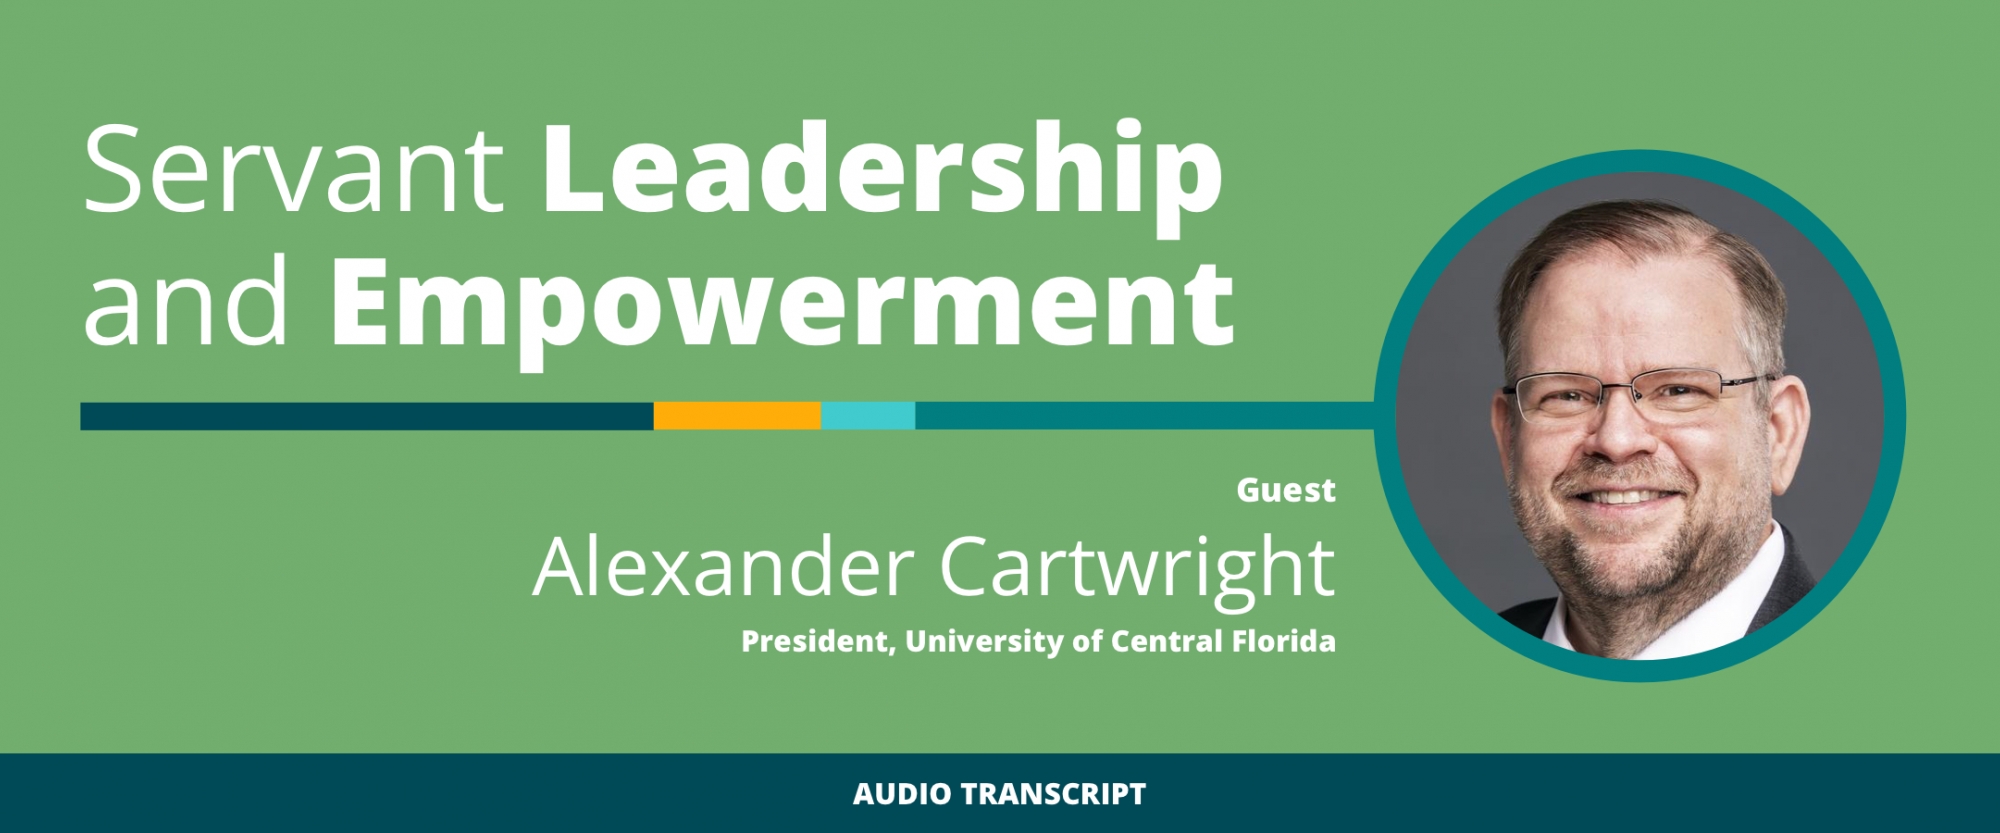 Weekly Wisdom Episode 20: Transcript of Conversation With Alexander Cartwright, University of Central Florida President